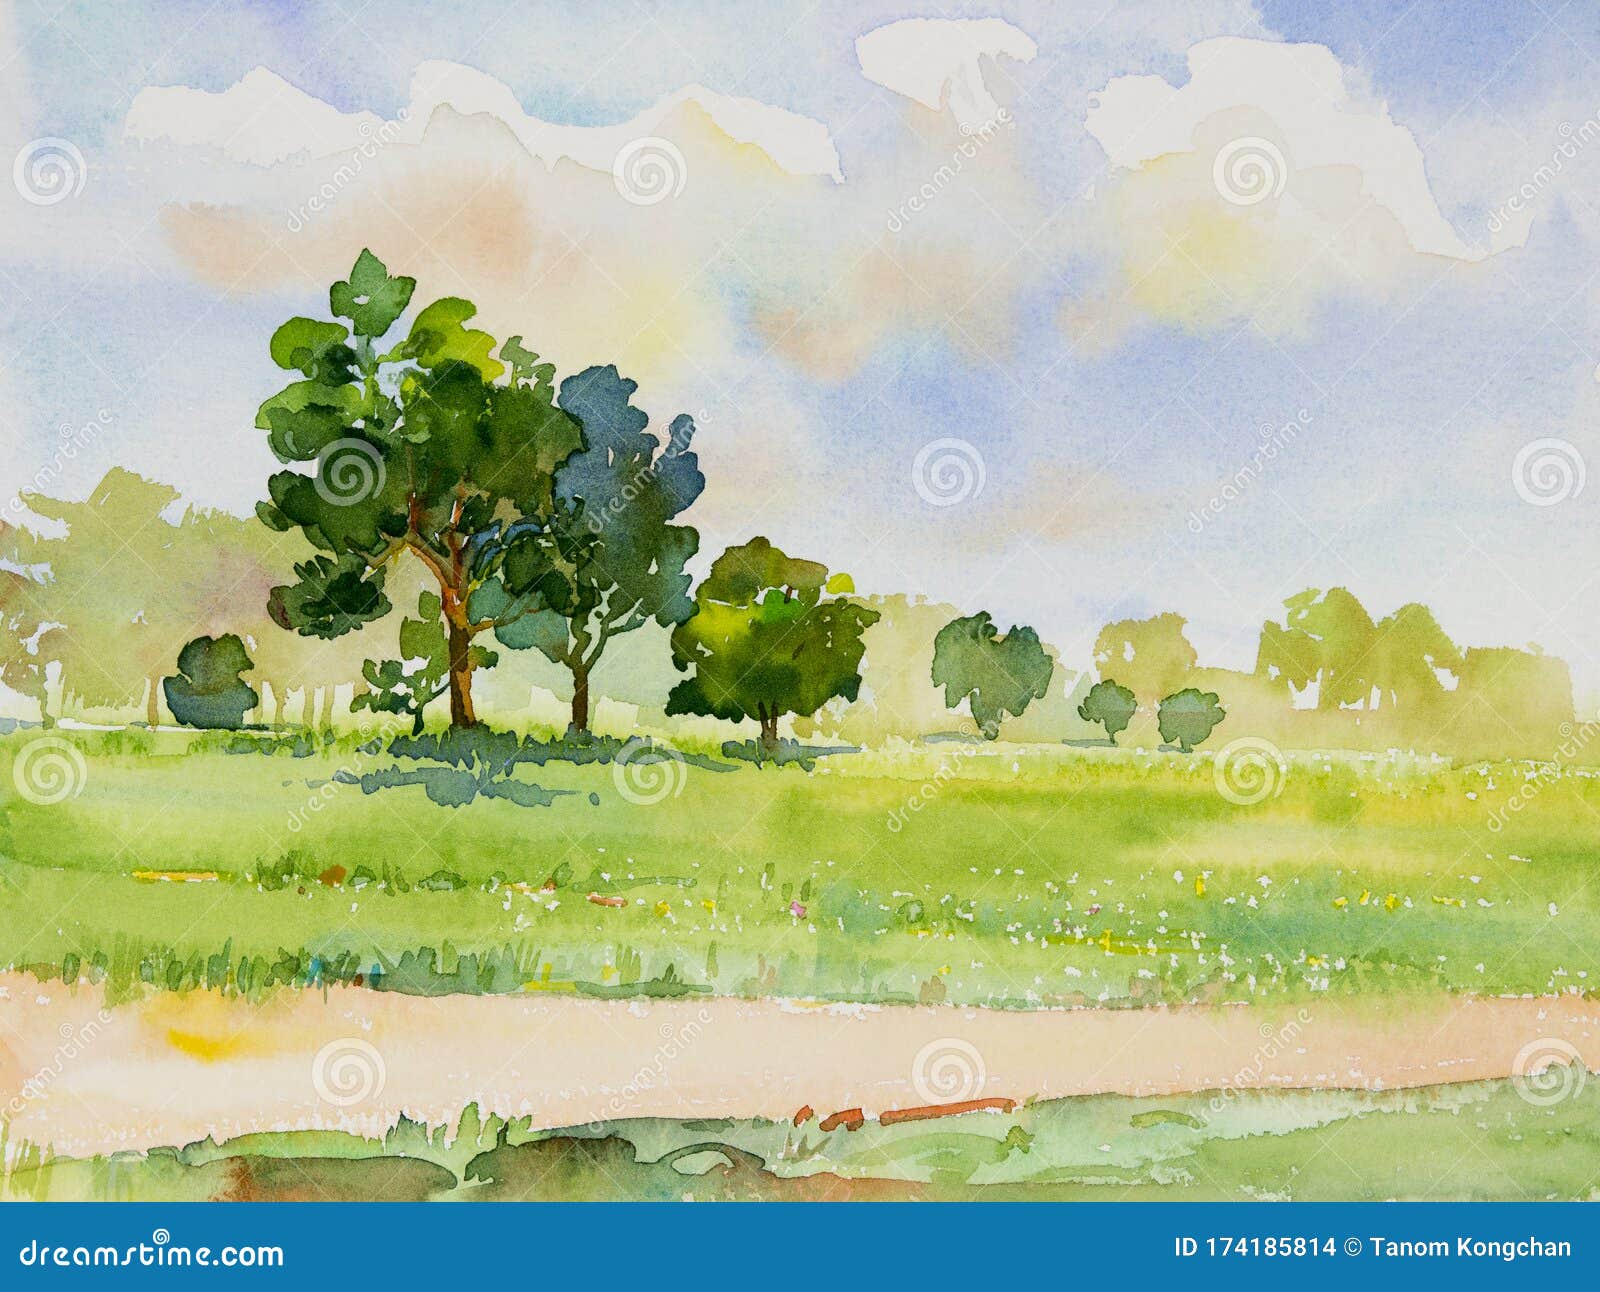 Watercolor Landscape Painting Panorama Colorful of Natural Beauty Stock Illustration - Illustration of background: 174185814